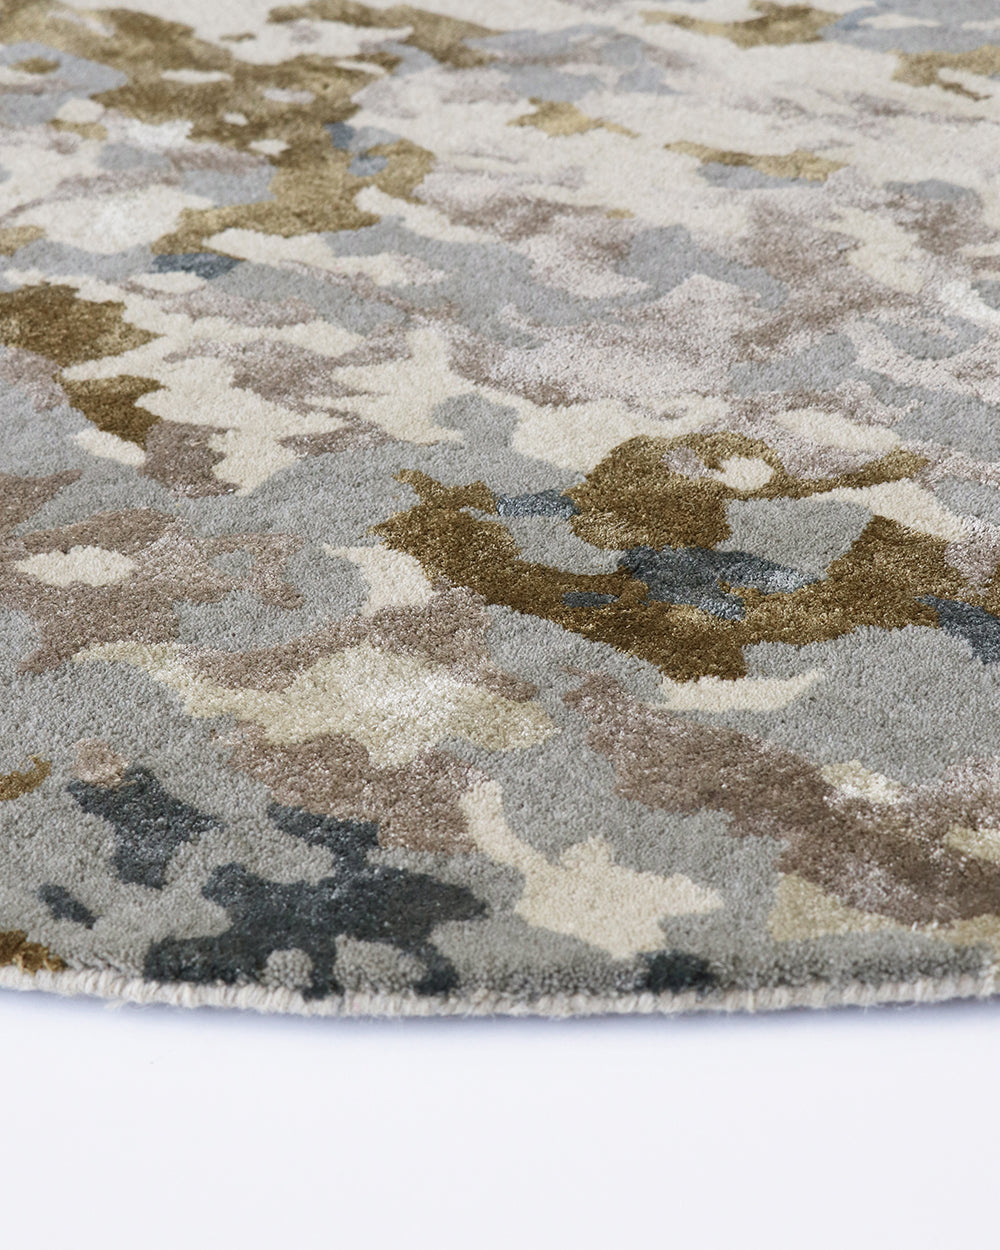 Fleur Multi Rug from Mulberi, abstract pattern of gold, greys, beignes and creams